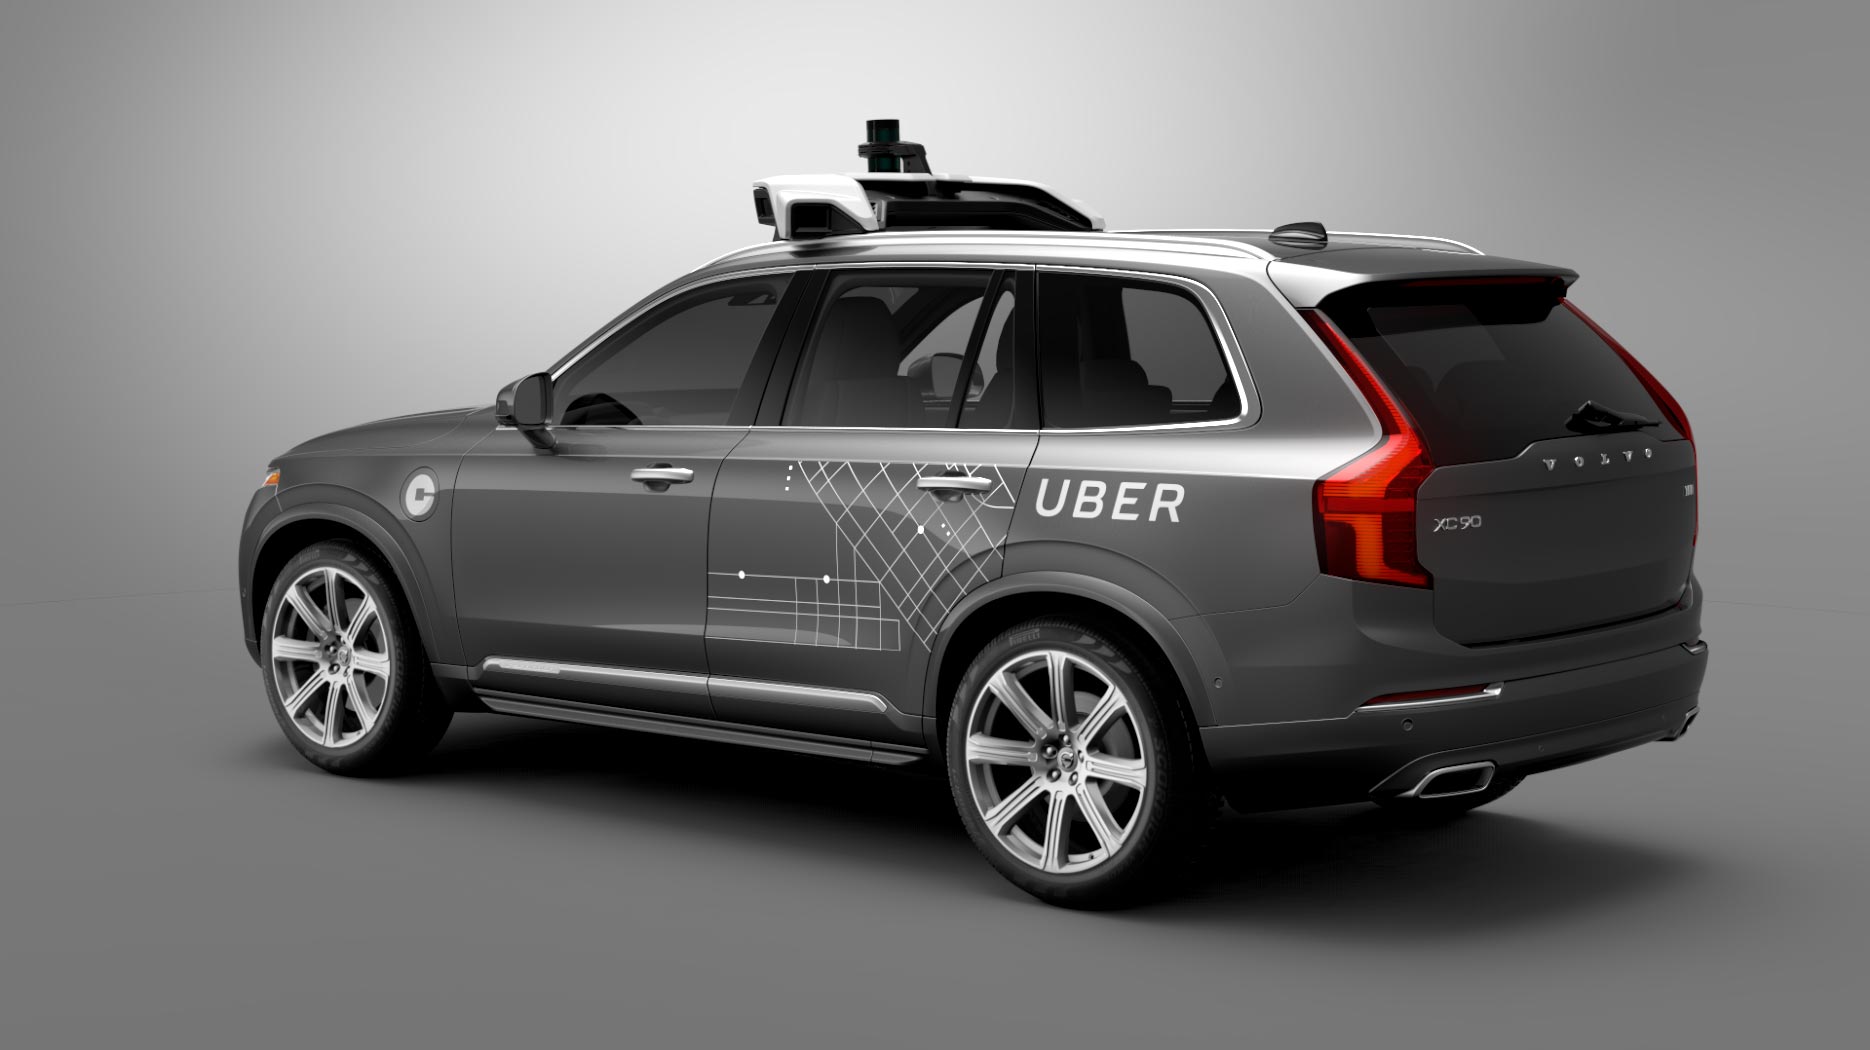 Uber’s First Self-Driving Fleet Arrives in Pittsburgh This Month thumbnail